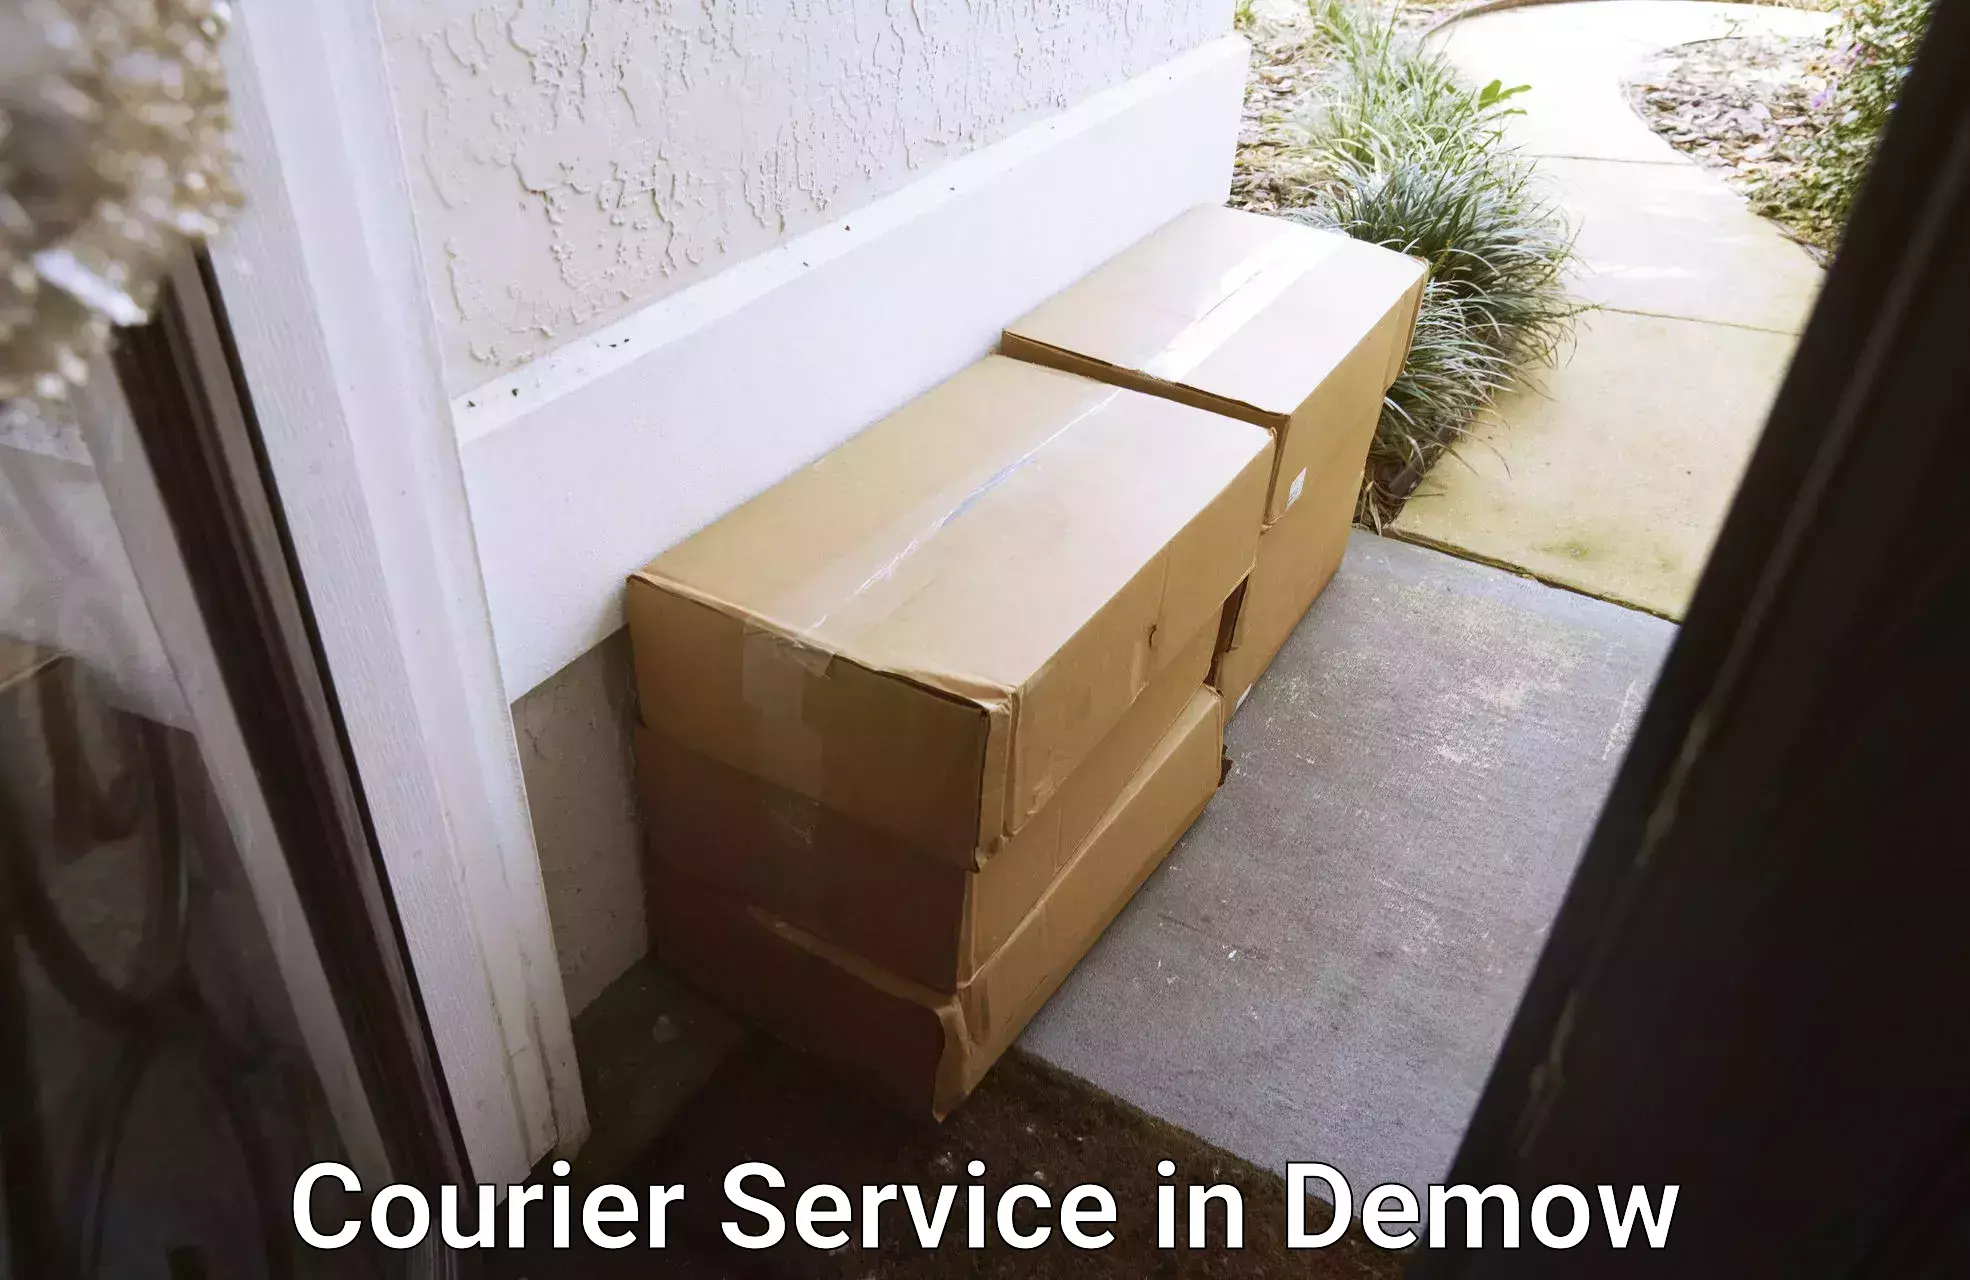 On-call courier service in Demow